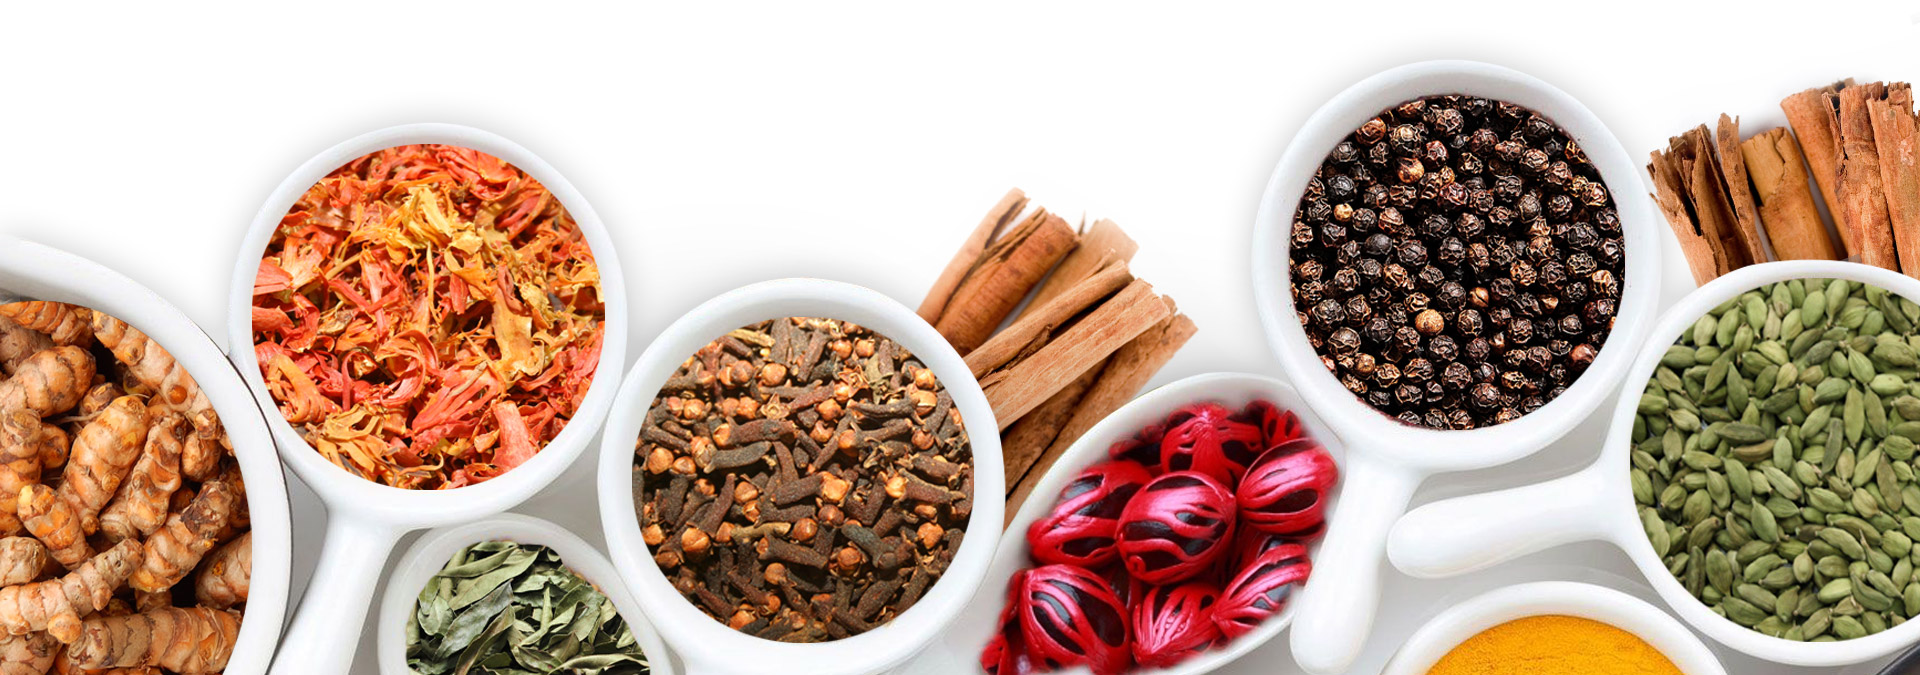 9 Cinnamon Essential Oil Benefits, Uses, And Side Effects